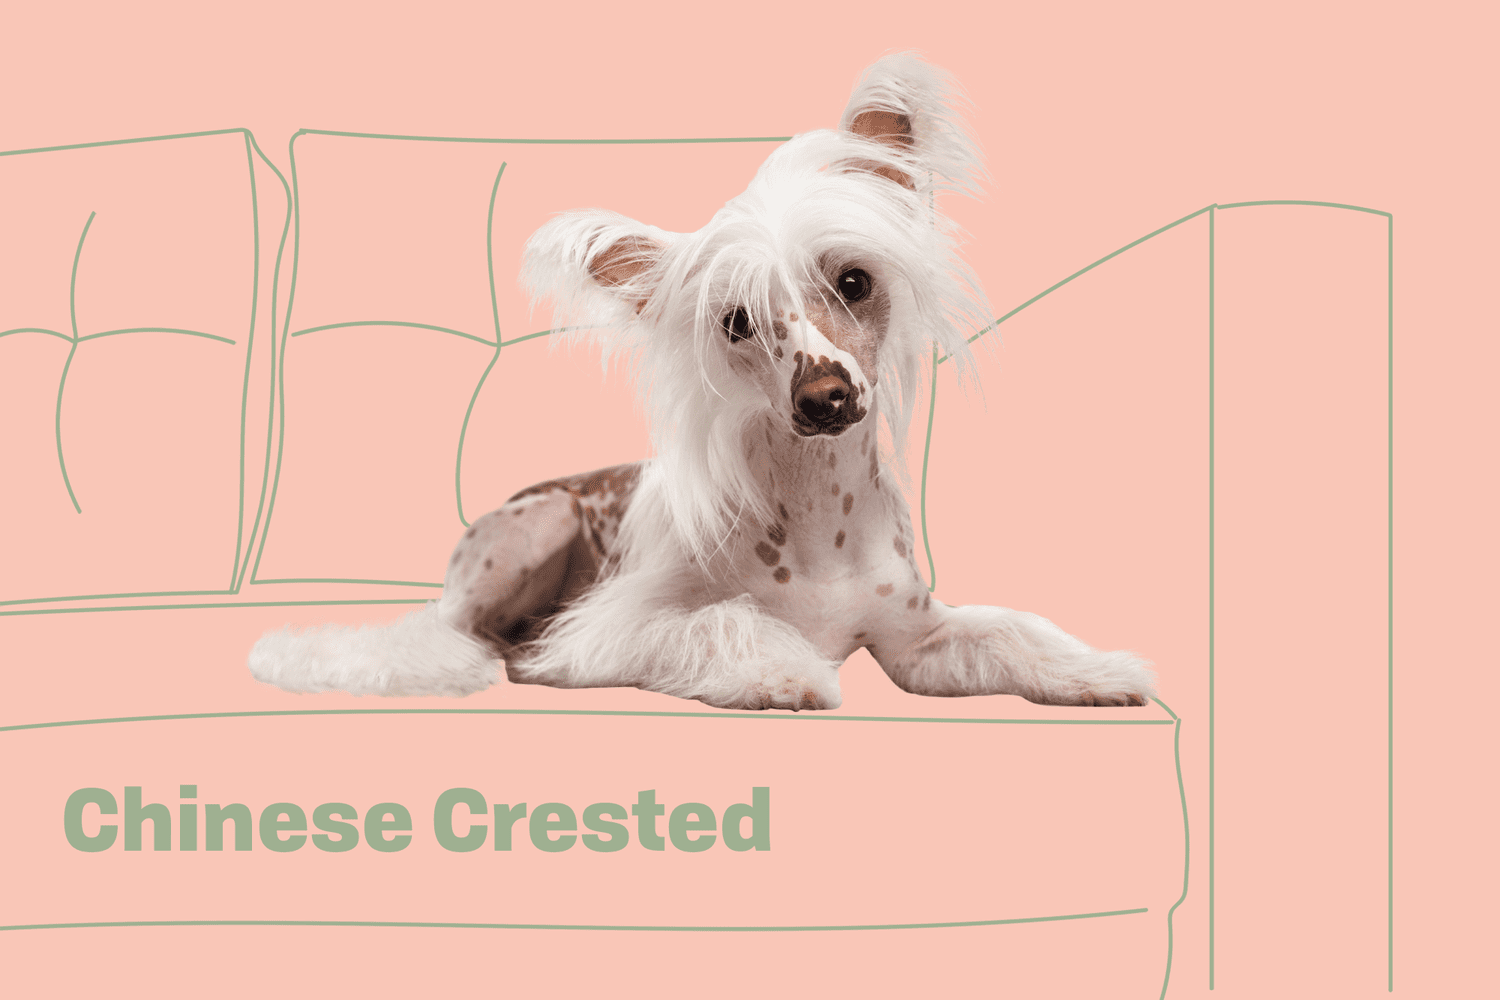 Chinese crested - Dog Breeds - Daily Paws